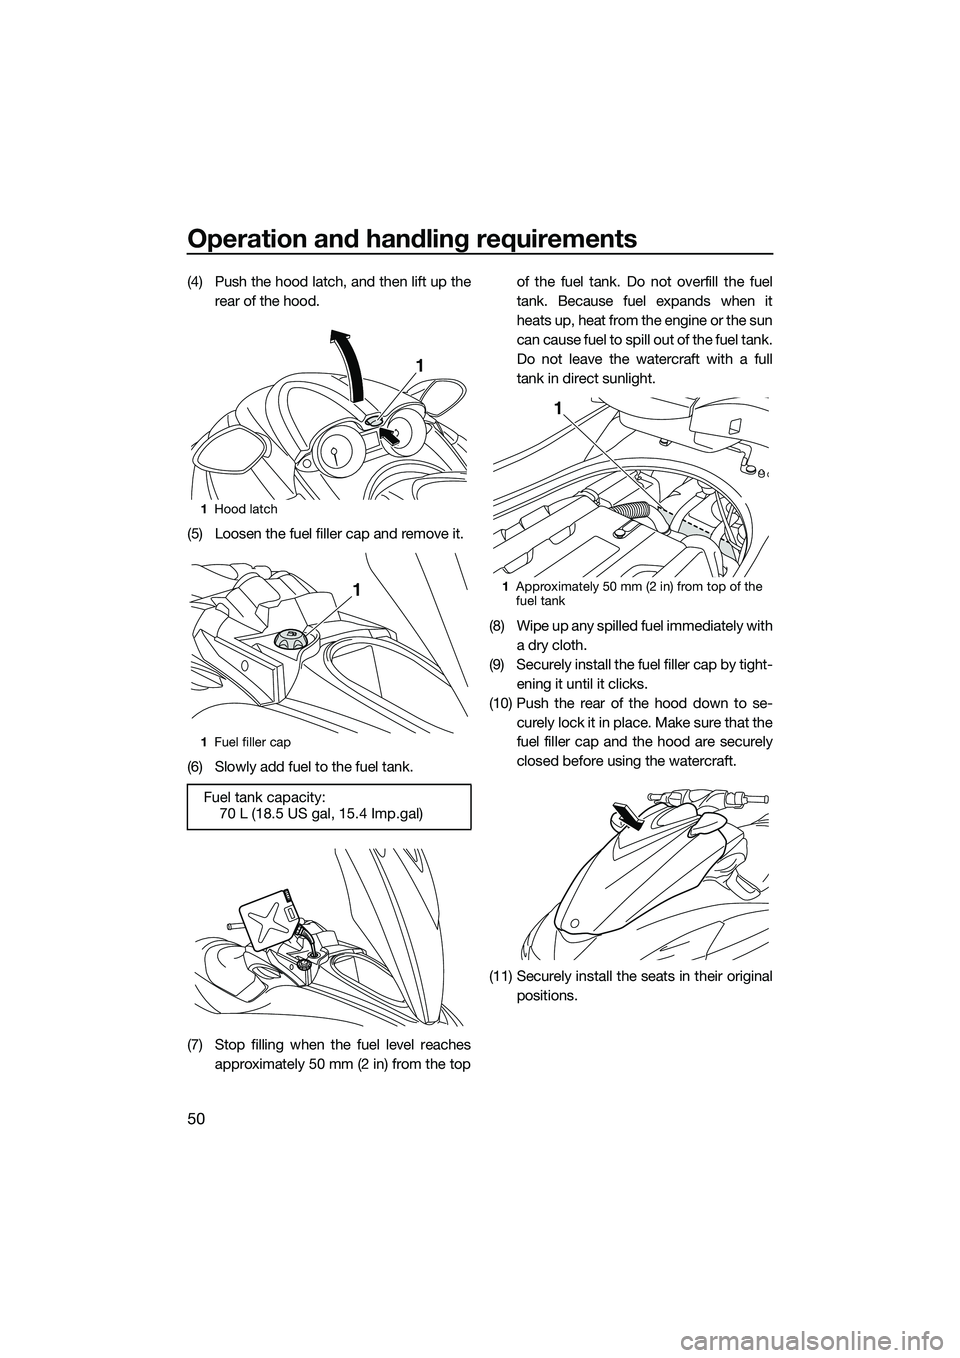 YAMAHA FZS SVHO 2014  Owners Manual Operation and handling requirements
50
(4) Push the hood latch, and then lift up therear of the hood.
(5) Loosen the fuel filler cap and remove it.
(6) Slowly add fuel to the fuel tank.
(7) Stop filli